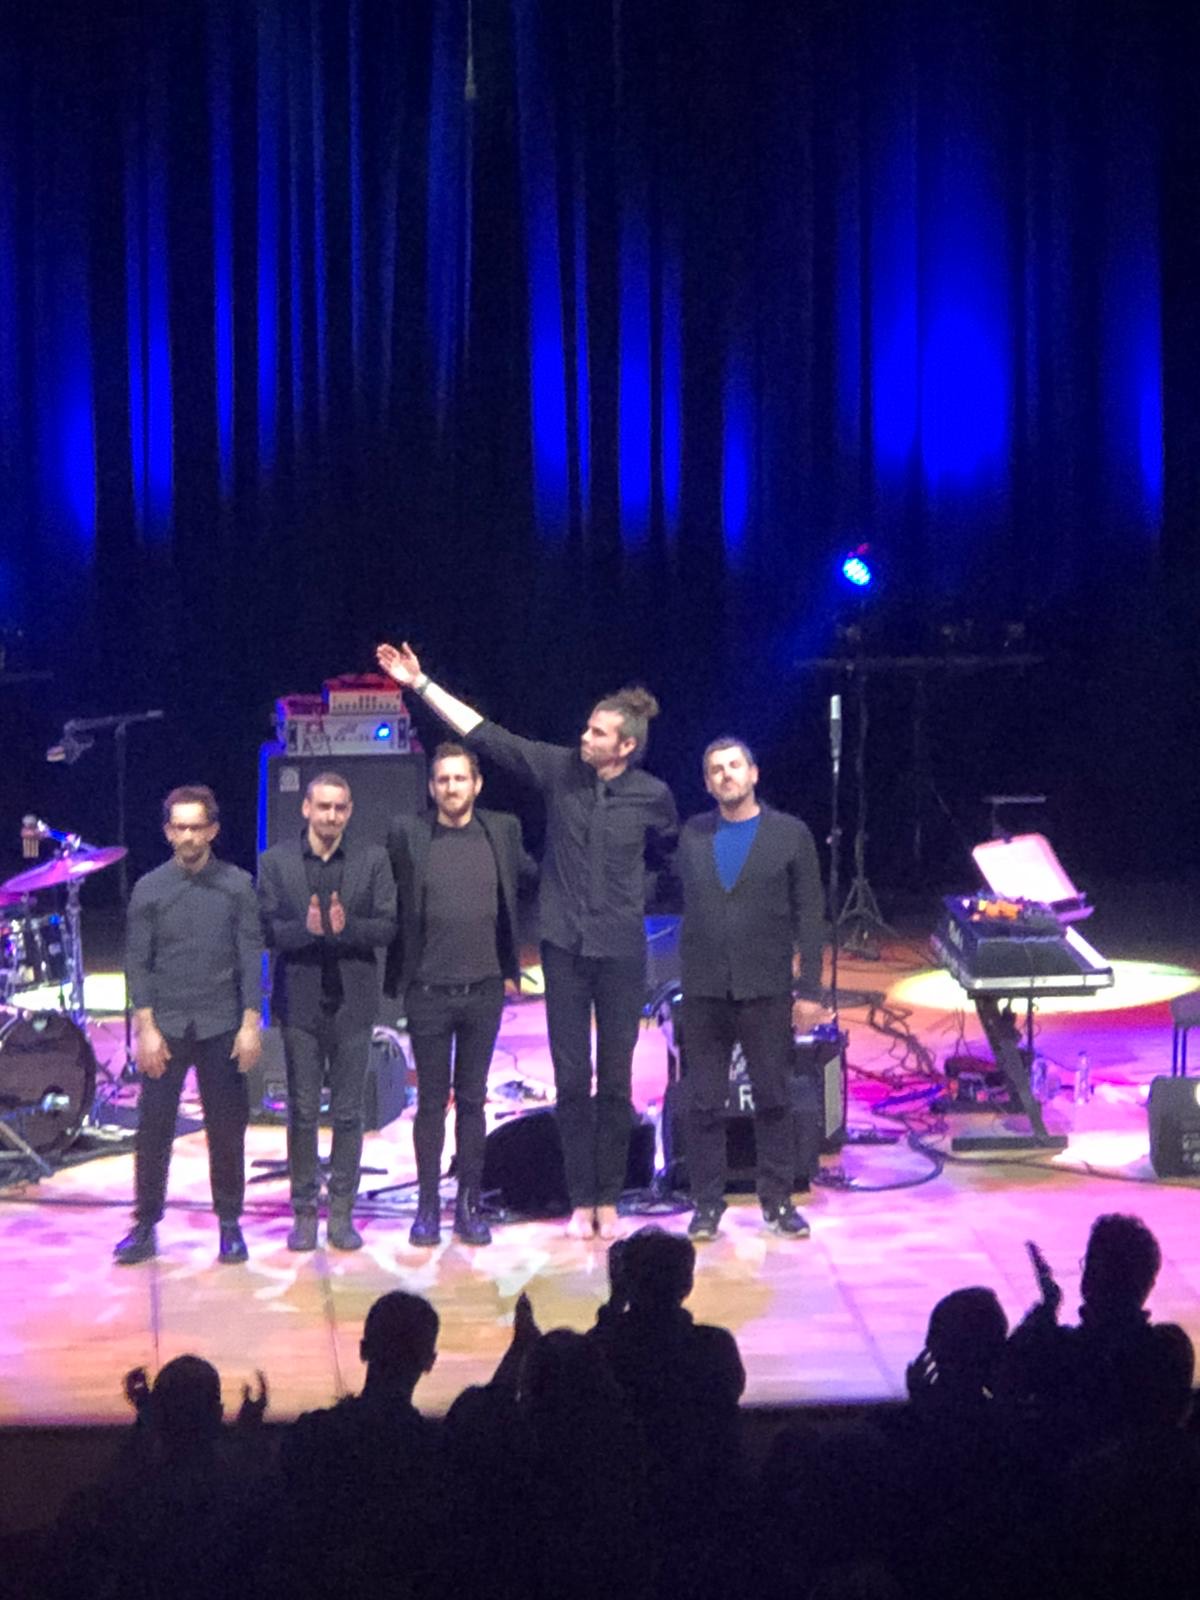 Vincent Peirani played at Cemal Reşit Rey Concert Hall with his quintet